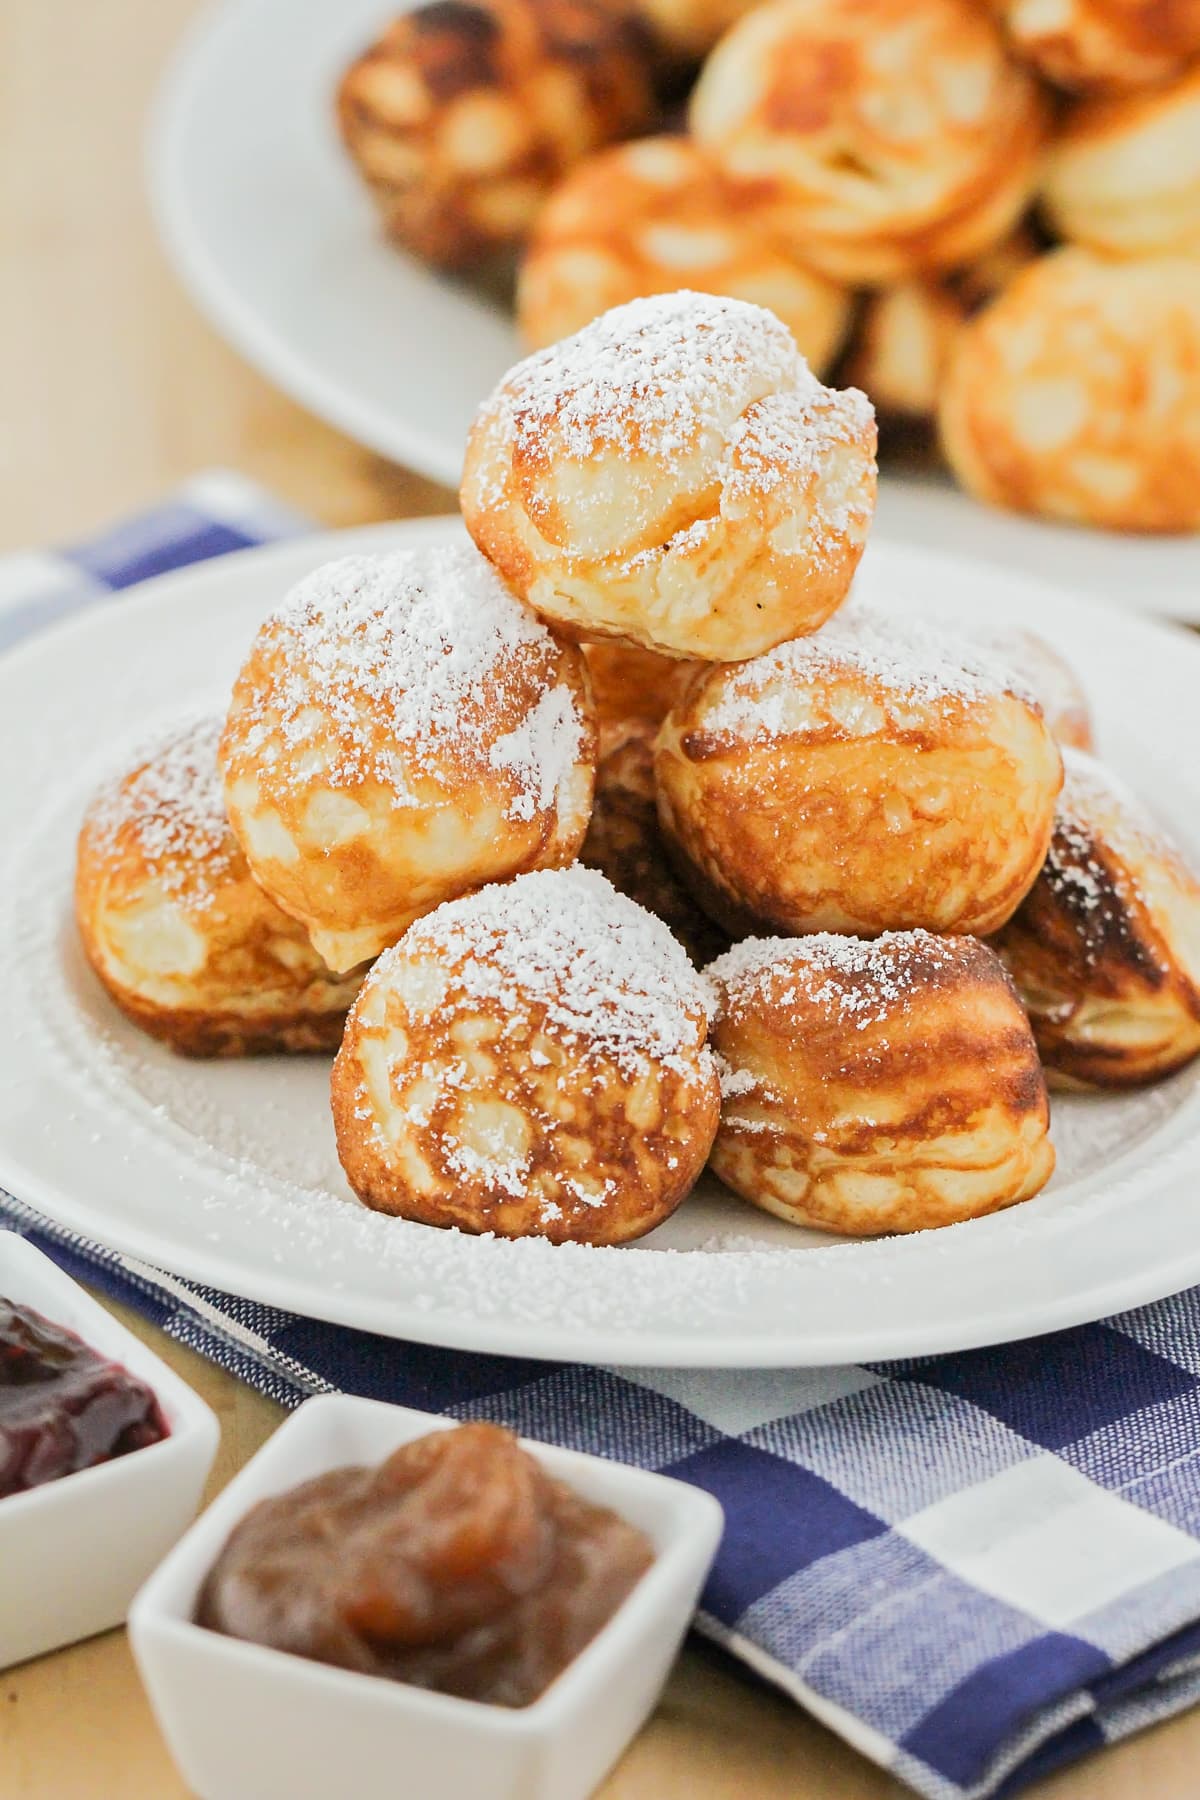 A pile of Aebleskiver dusted with powdered sugar.